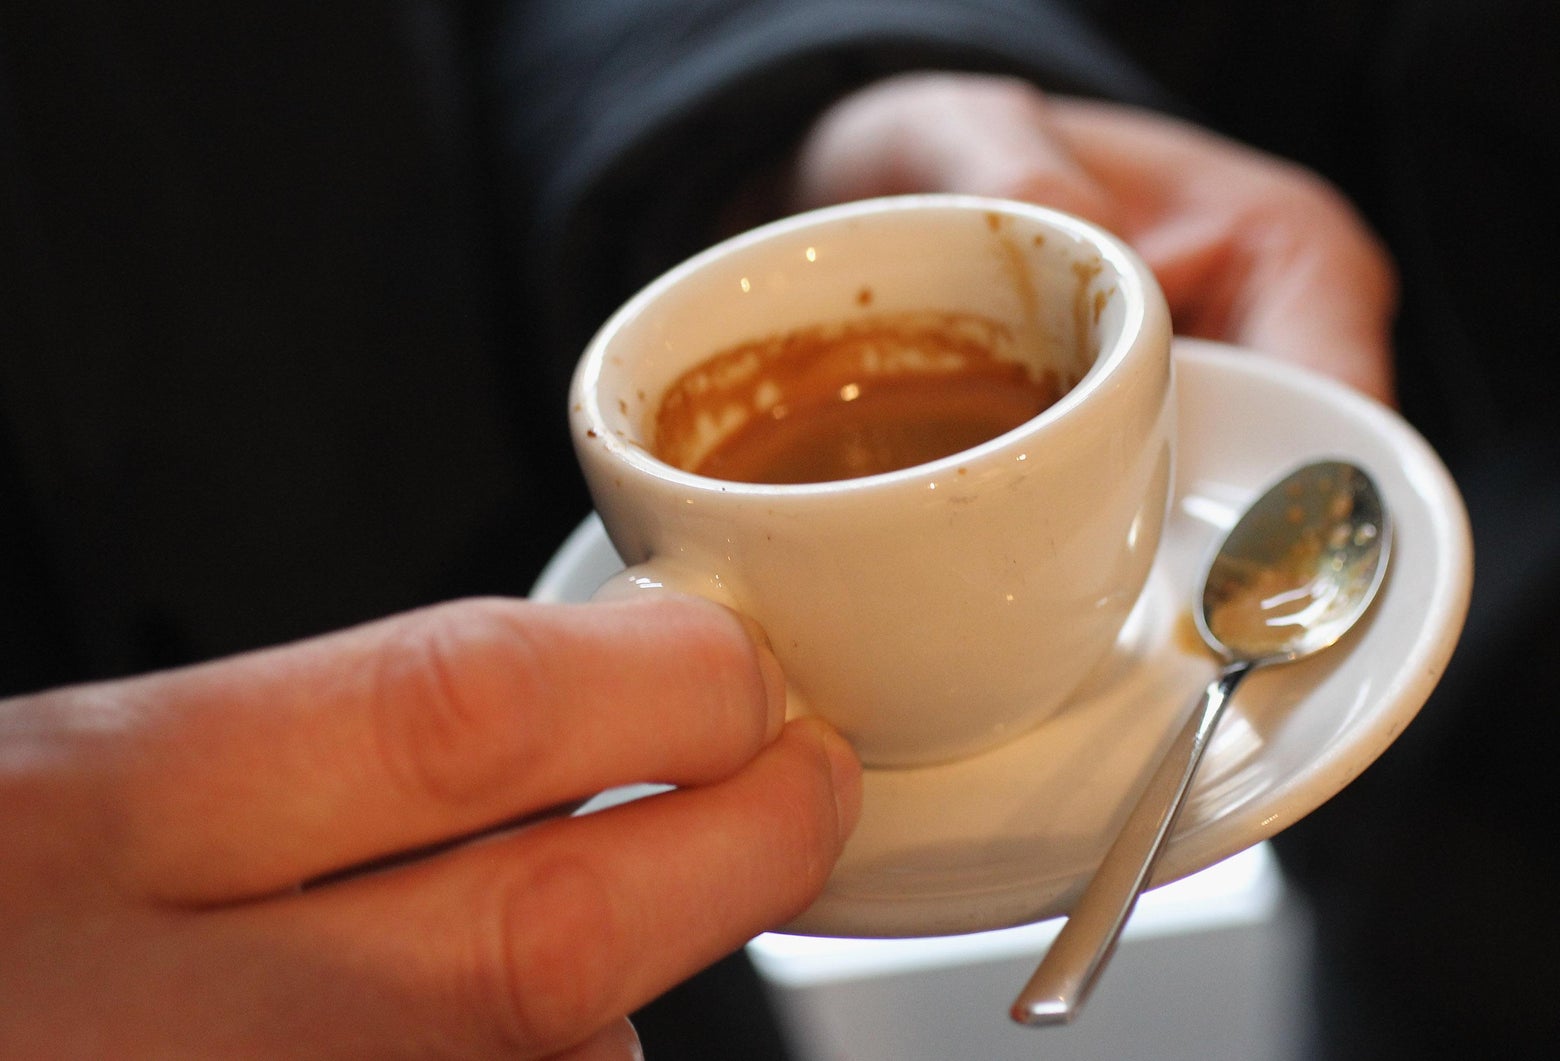 How many cups of coffee are equal to one shot of espresso? - Quora